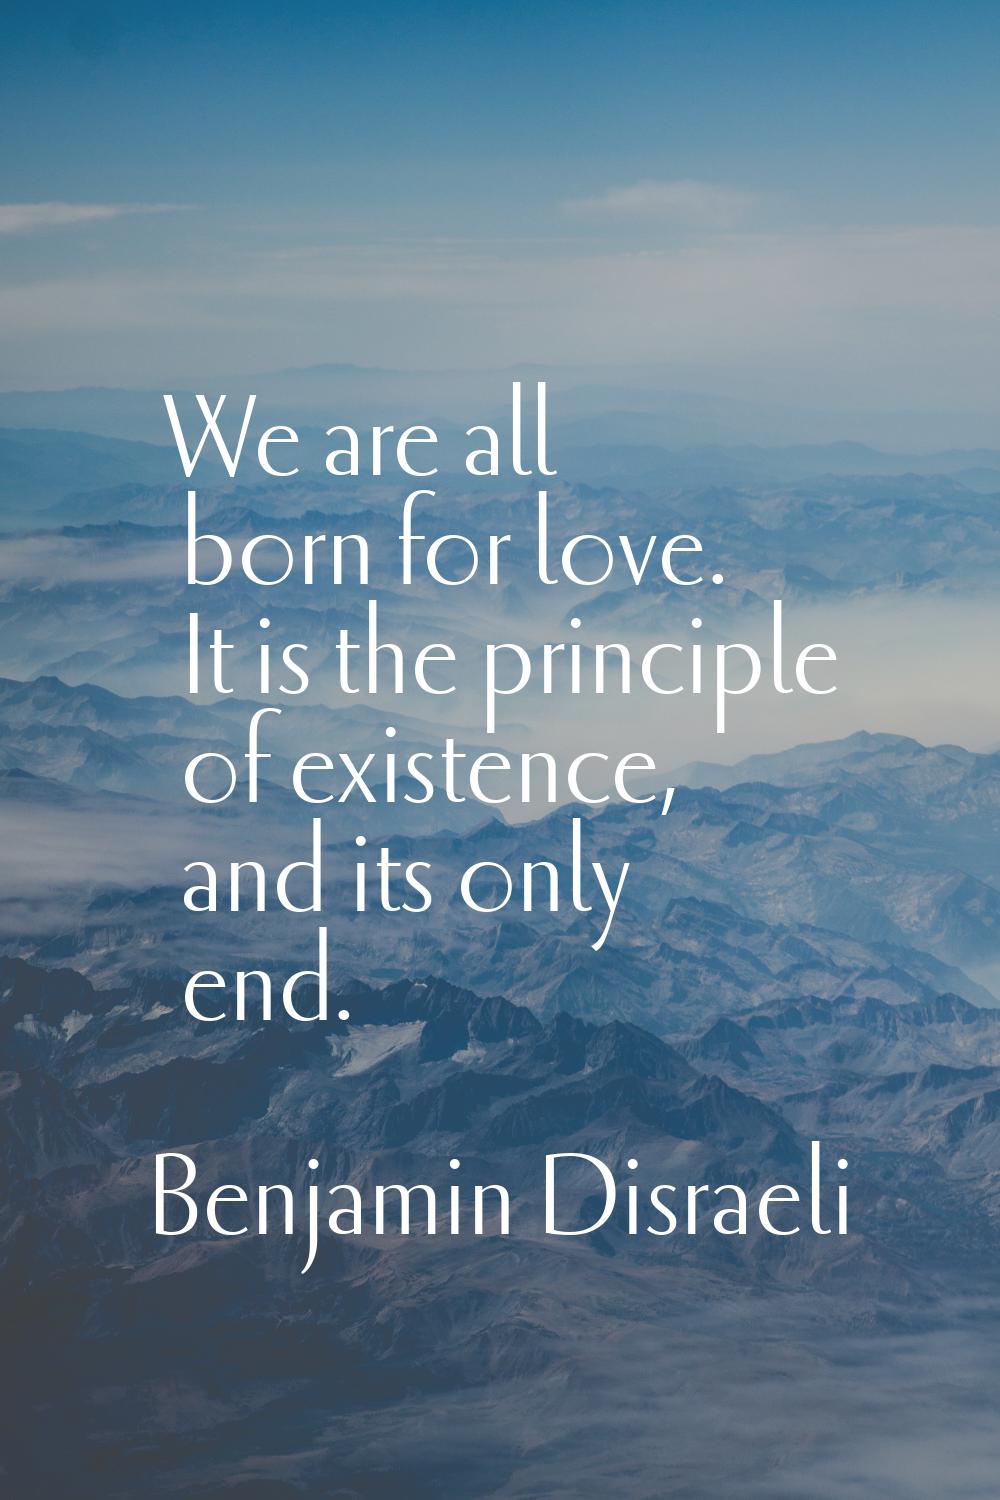 We are all born for love. It is the principle of existence, and its only end.